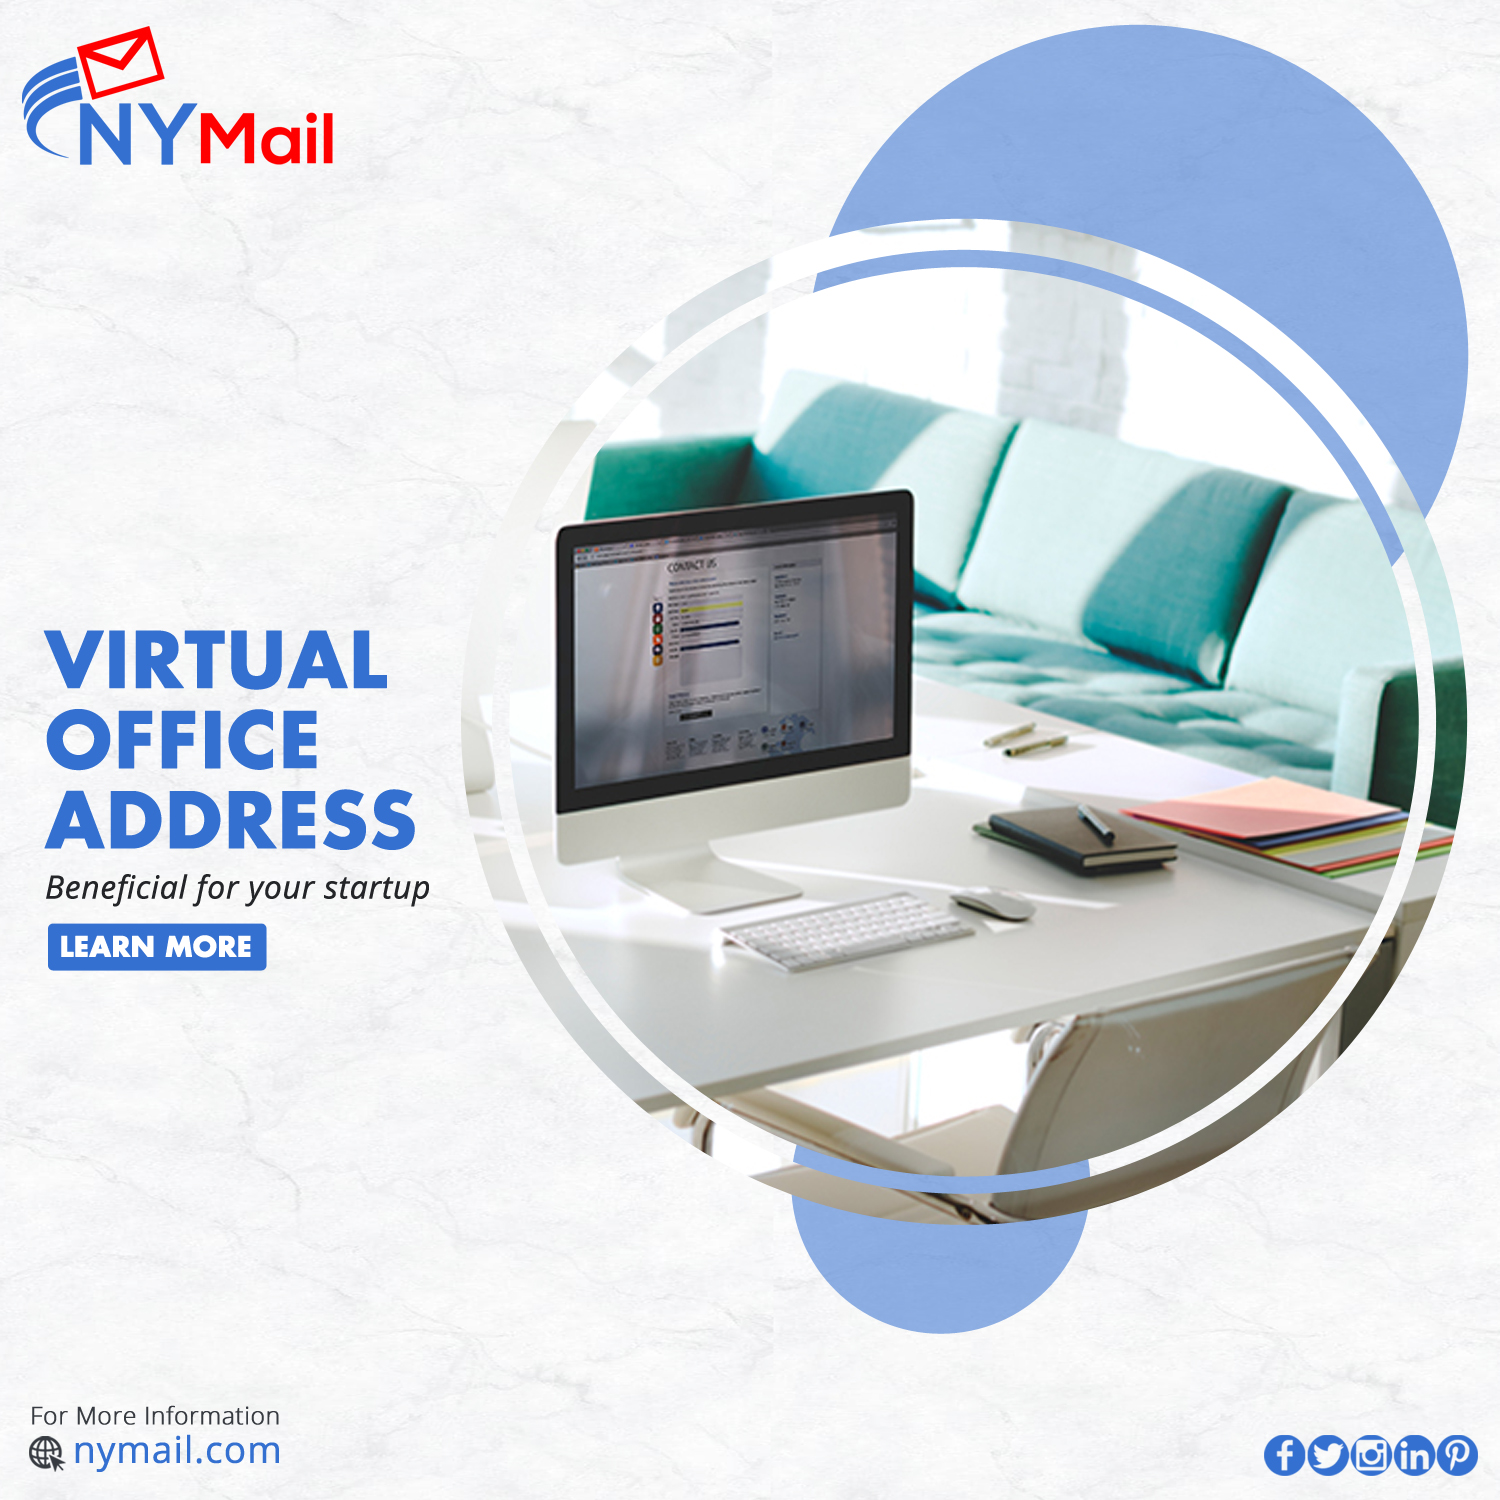 How can Virtual Office Addresses Benefit Your Startup?